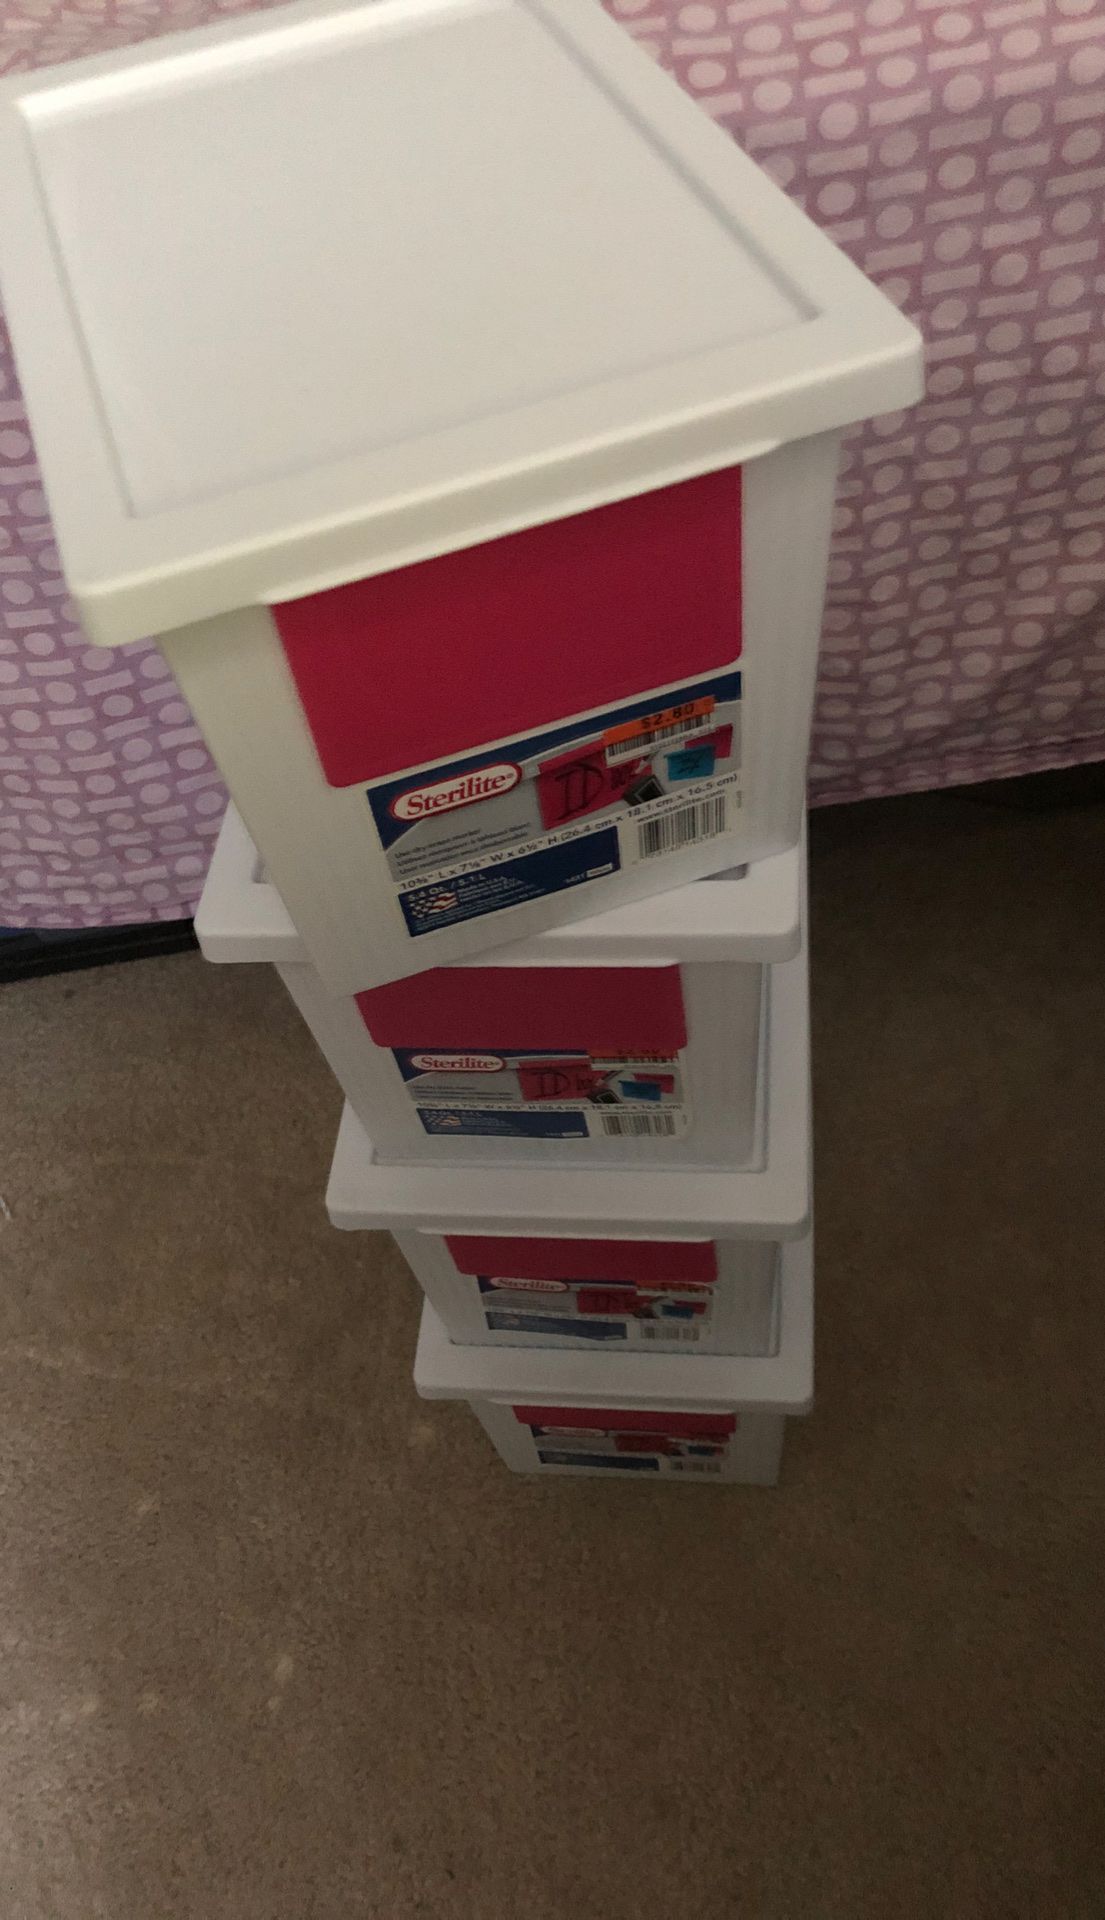 4 boxes .. Storage containers for room